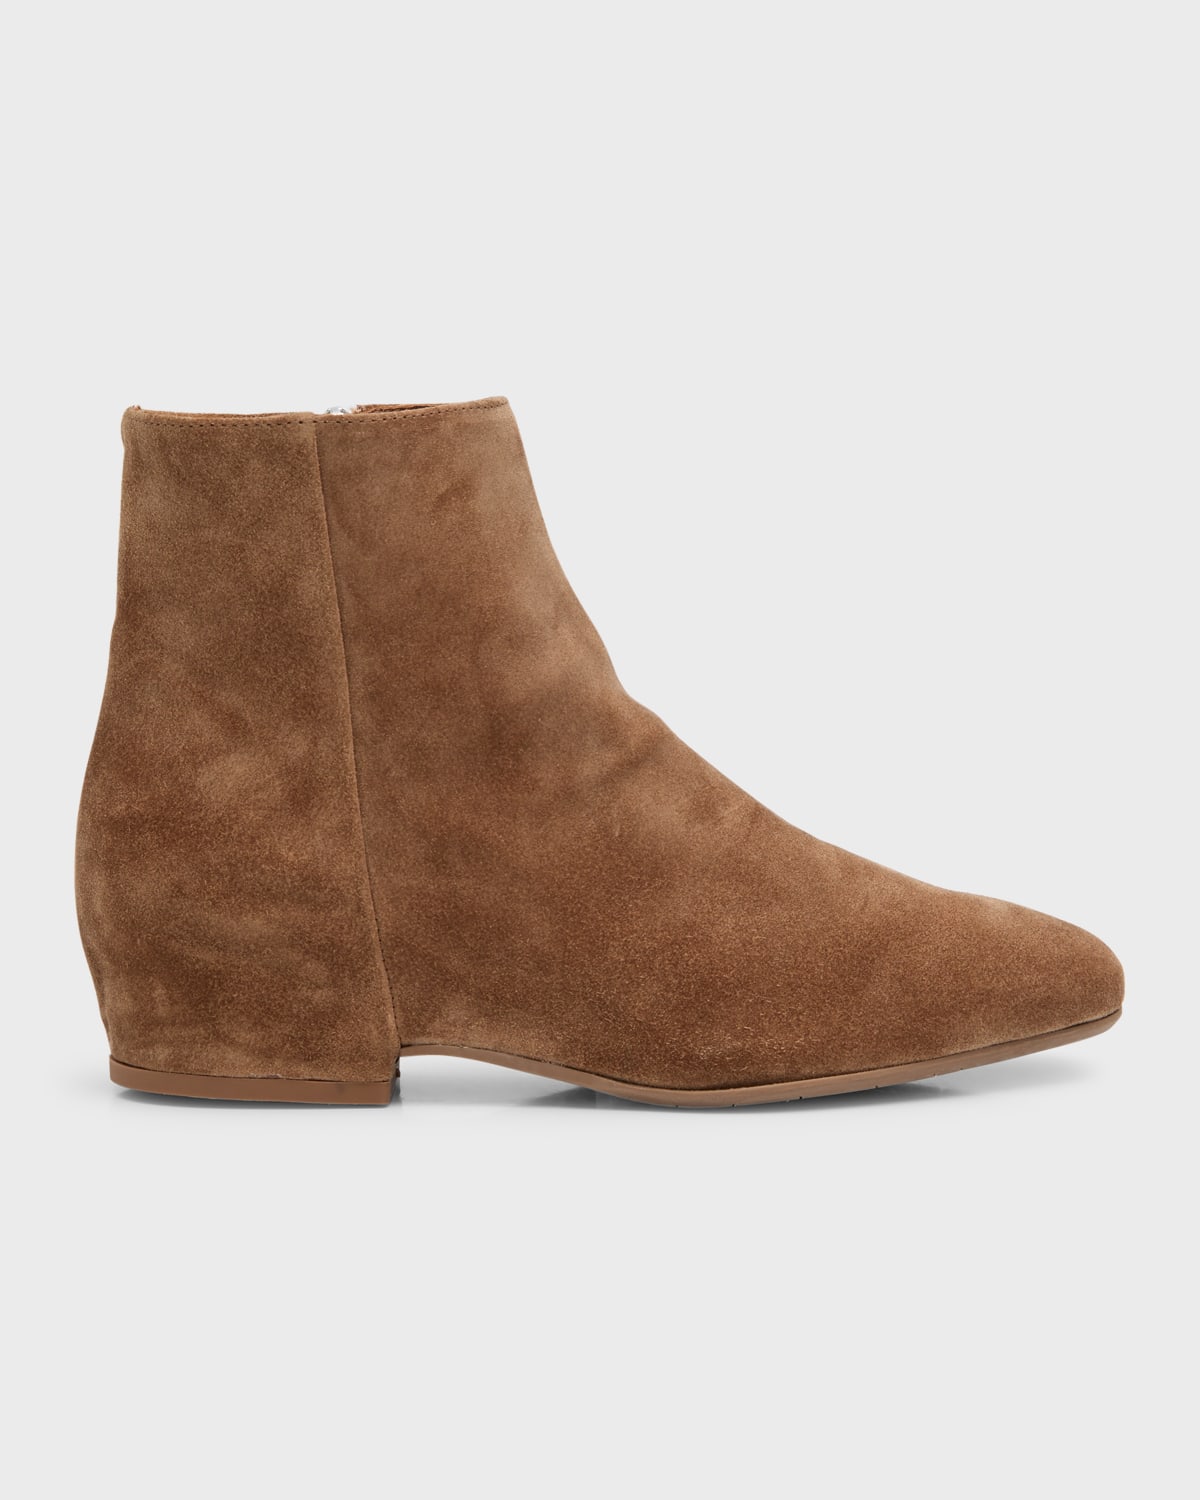 Aquatalia Ulyssa Waterproof Suede Ankle Boots With Hidden Wedge In Champagne